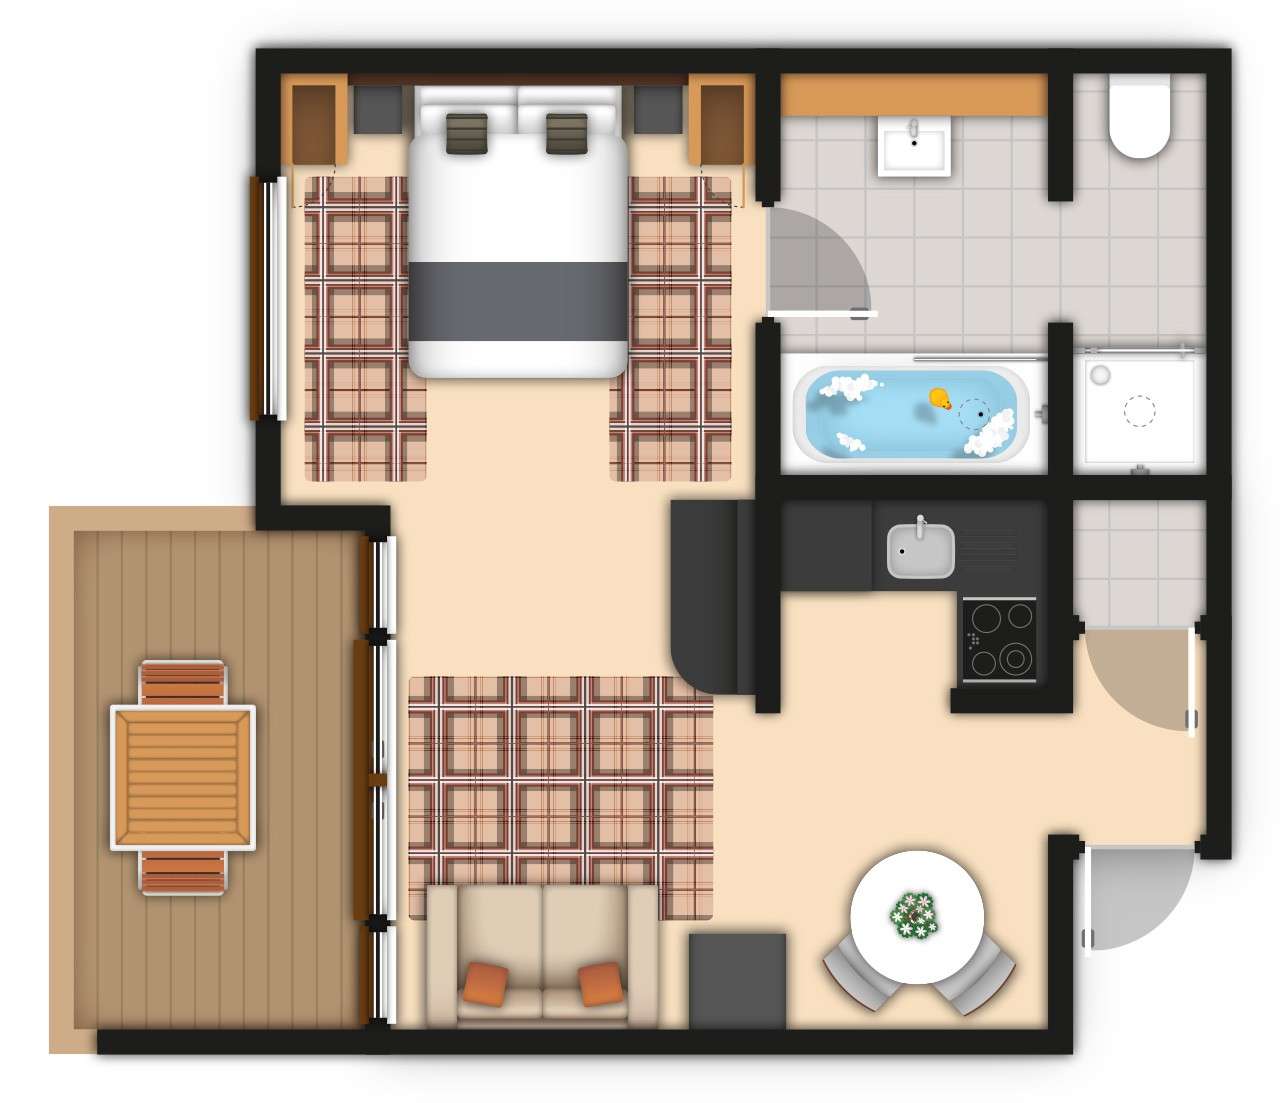 A detailed apartment floor plan illustration showing bedroom, bathrooms, living area, kitchen, and outdoor space. If you require further assistance viewing the floor plan or need further information on the accommodation type please contact Guest Services.